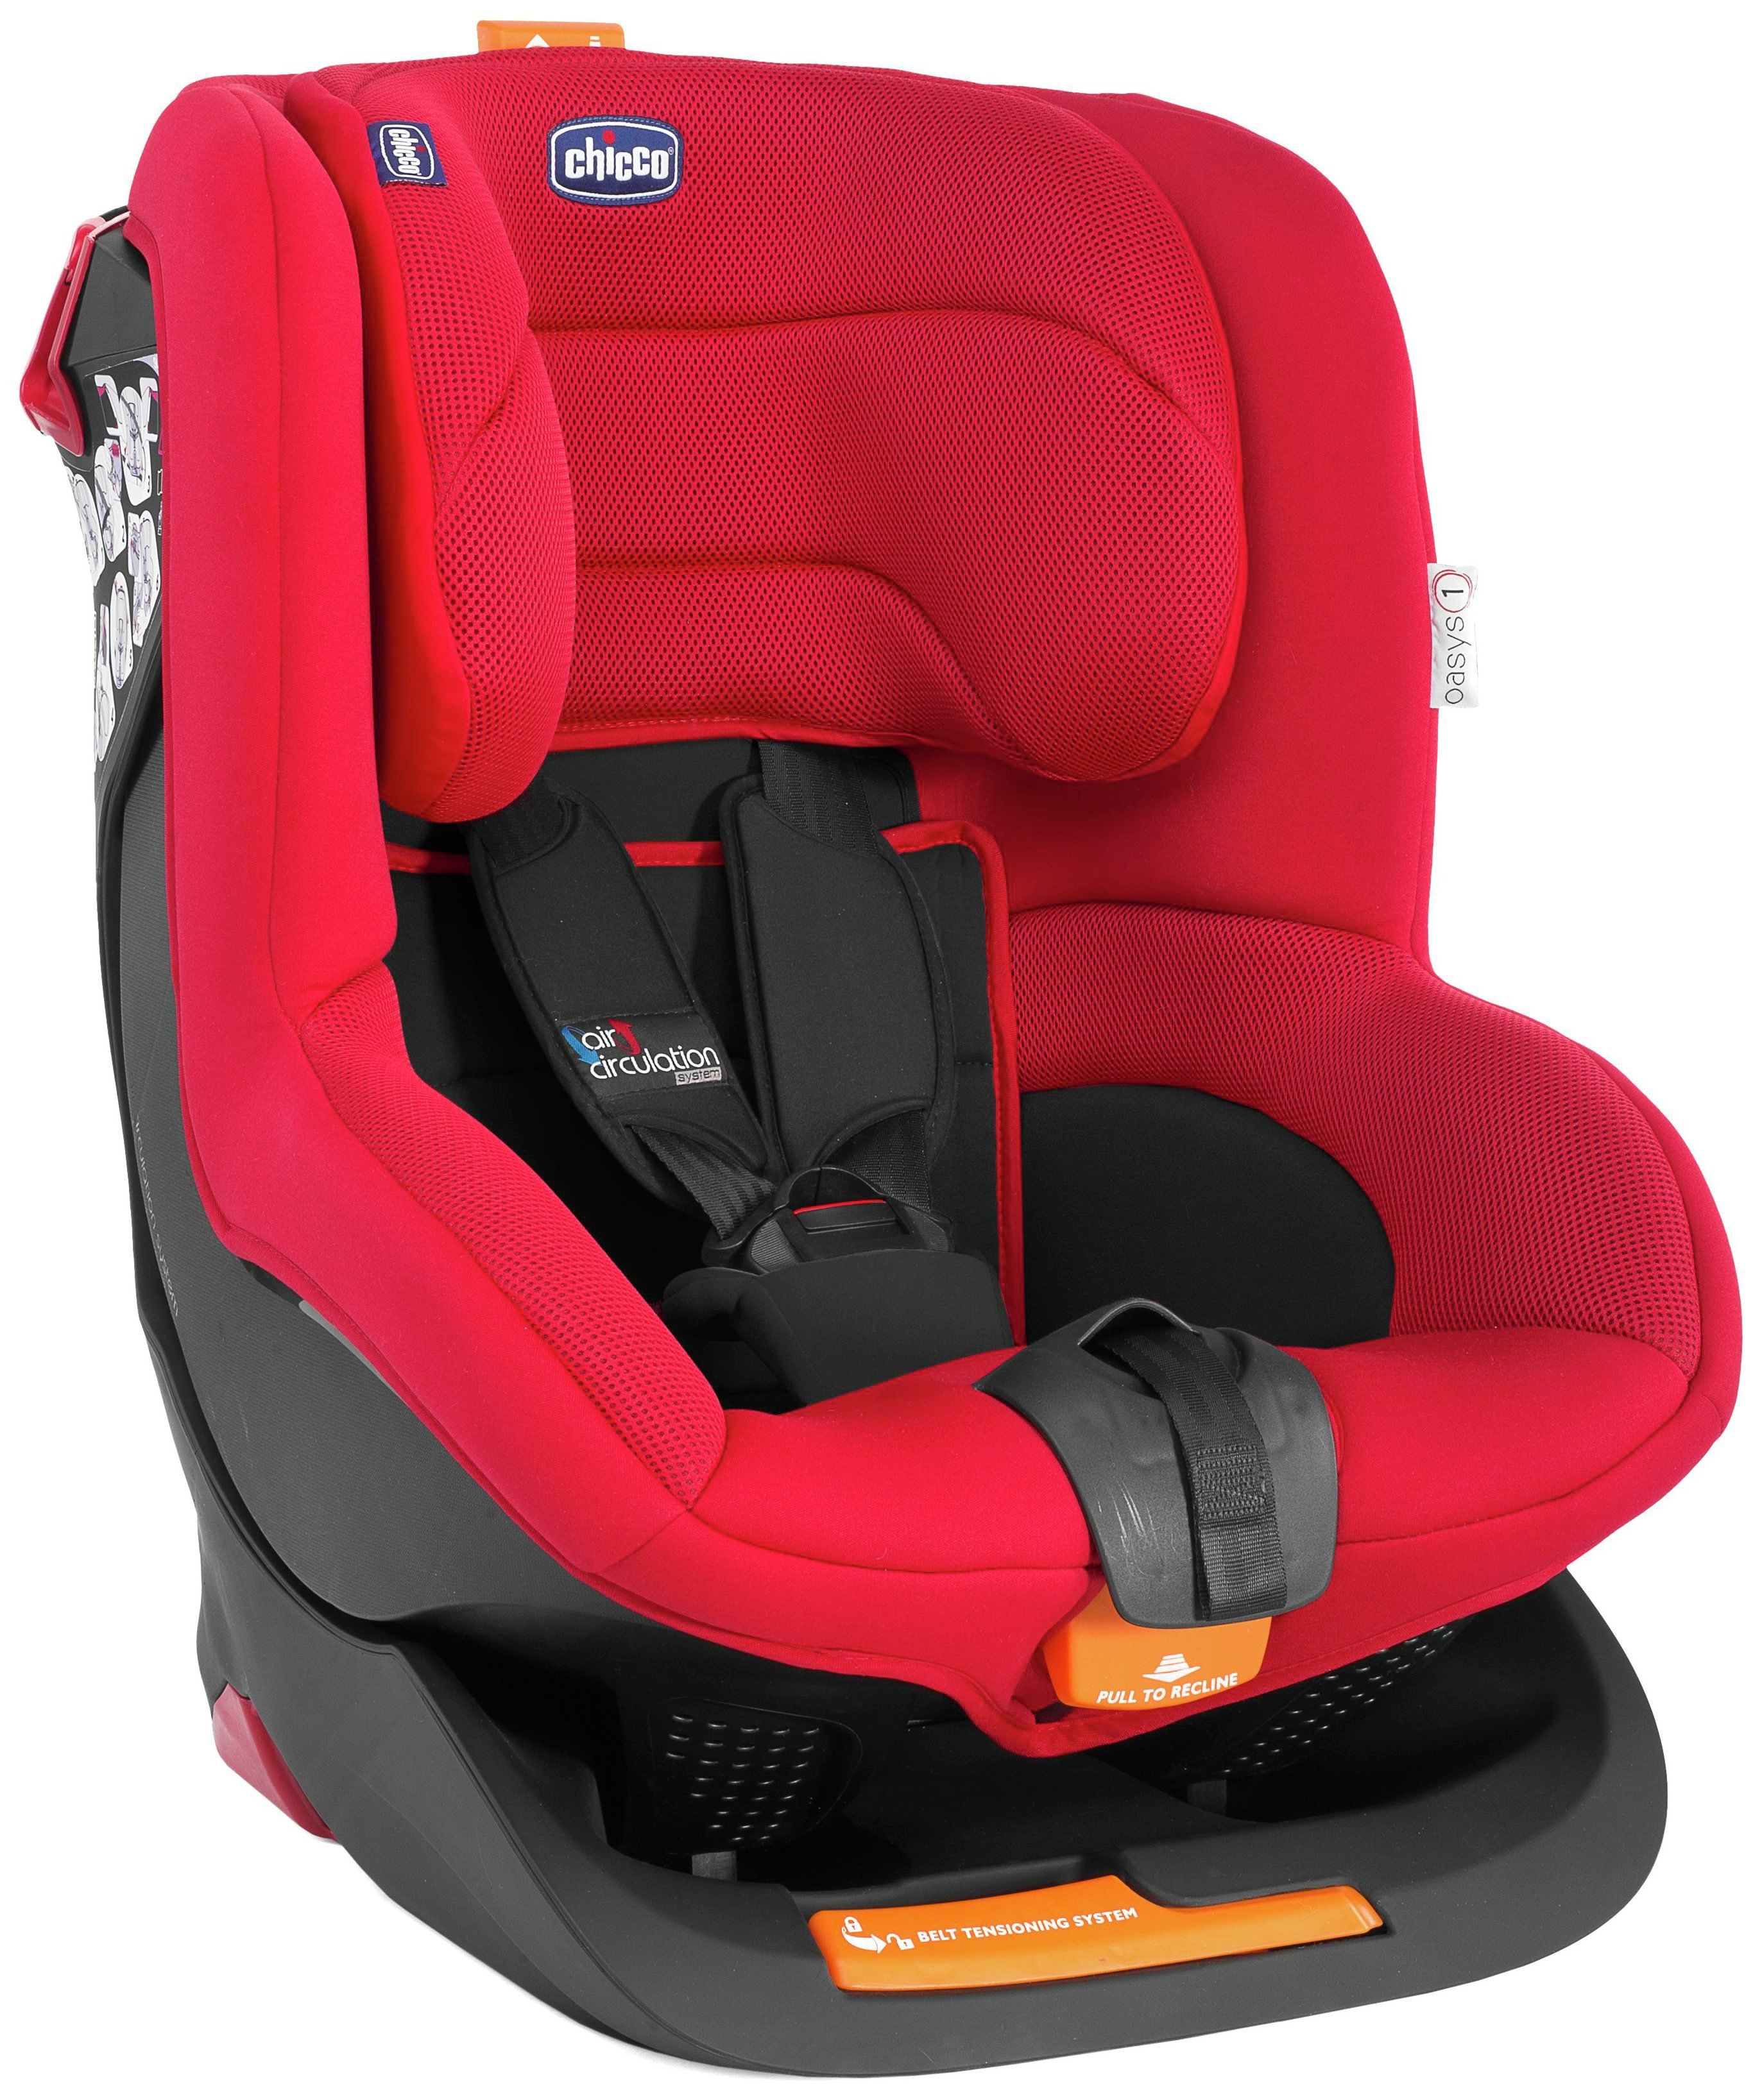 Chicco Oasys Group 1 Car Seat Reviews